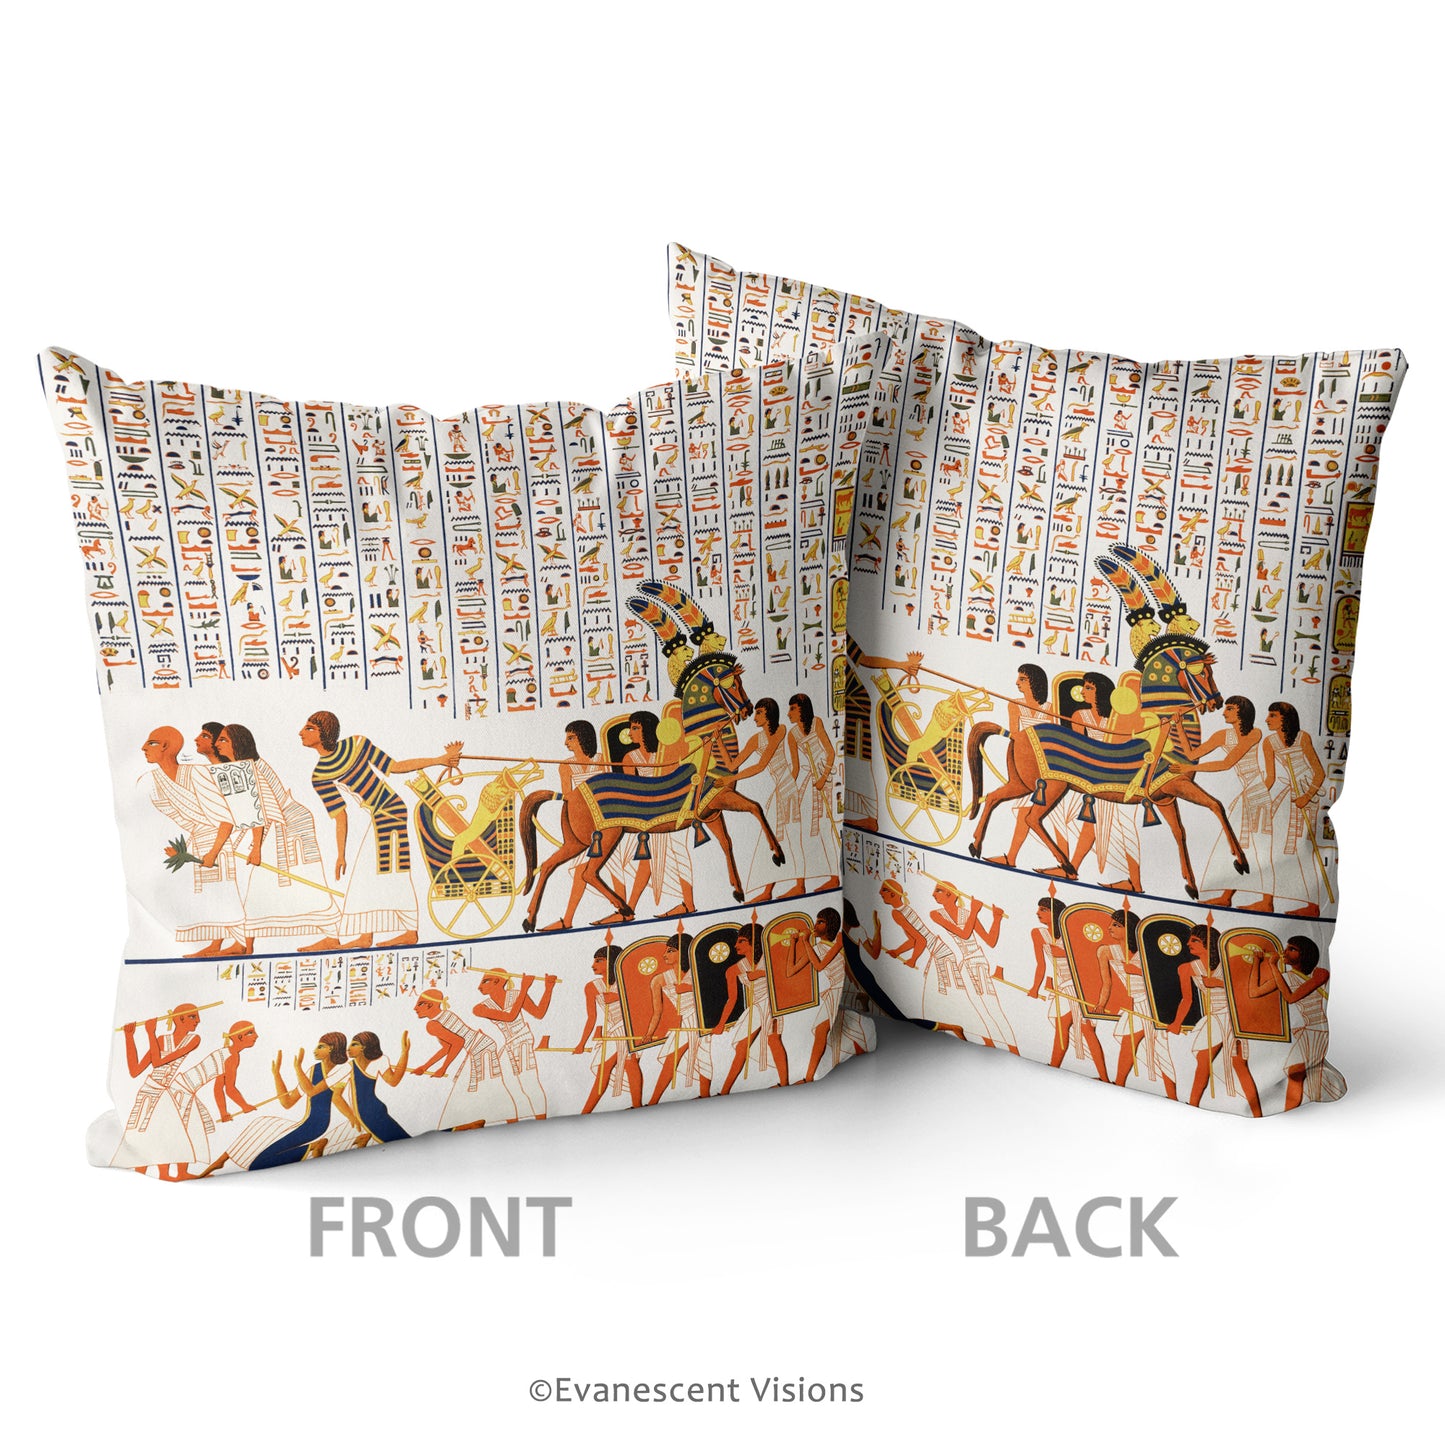 Front and back views of the Ancient Egypt Scatter Cushion depicting people and hieroglyphs.